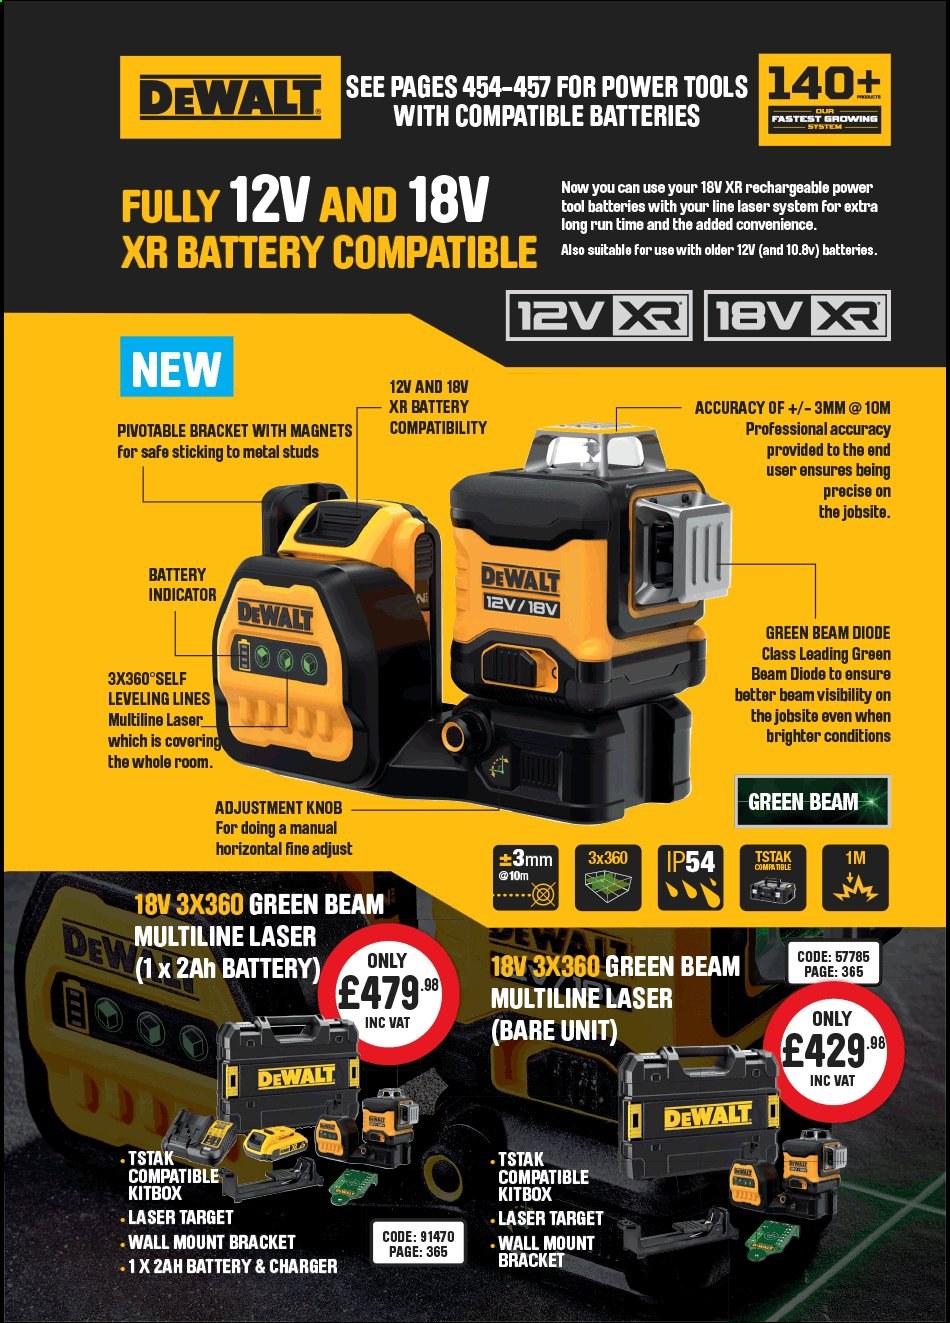 Toolstation offer . Page 363.